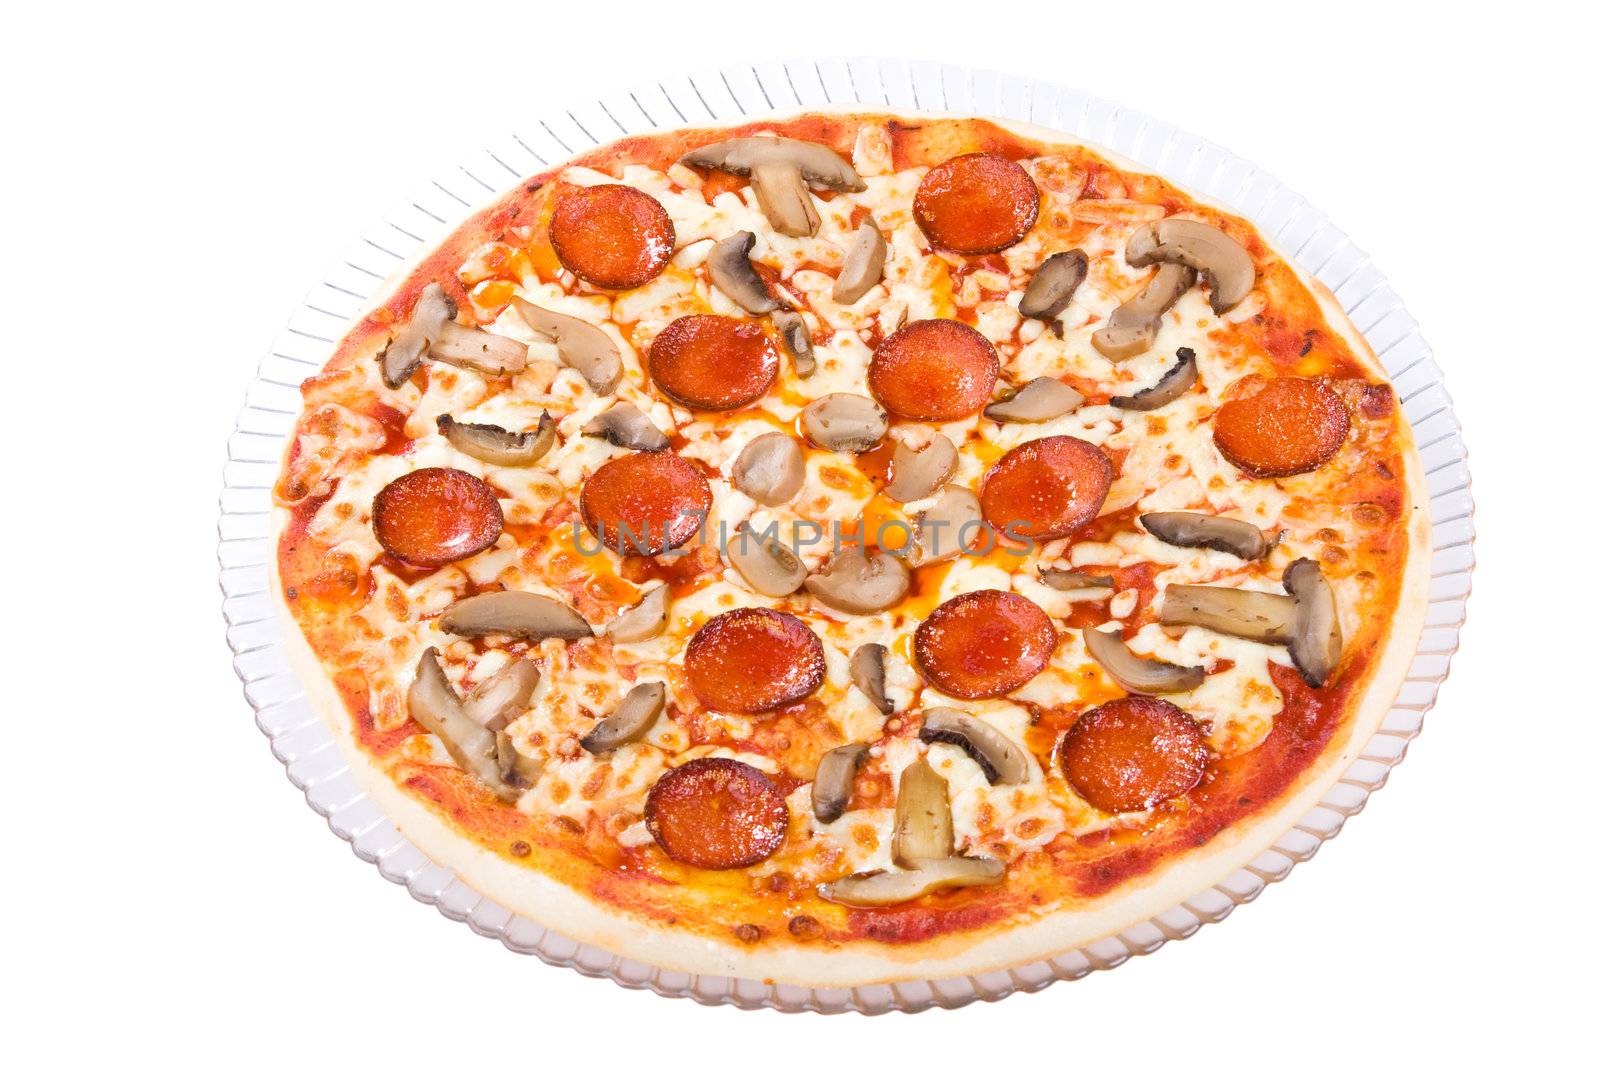 The top view on the Pepperoni Pizza